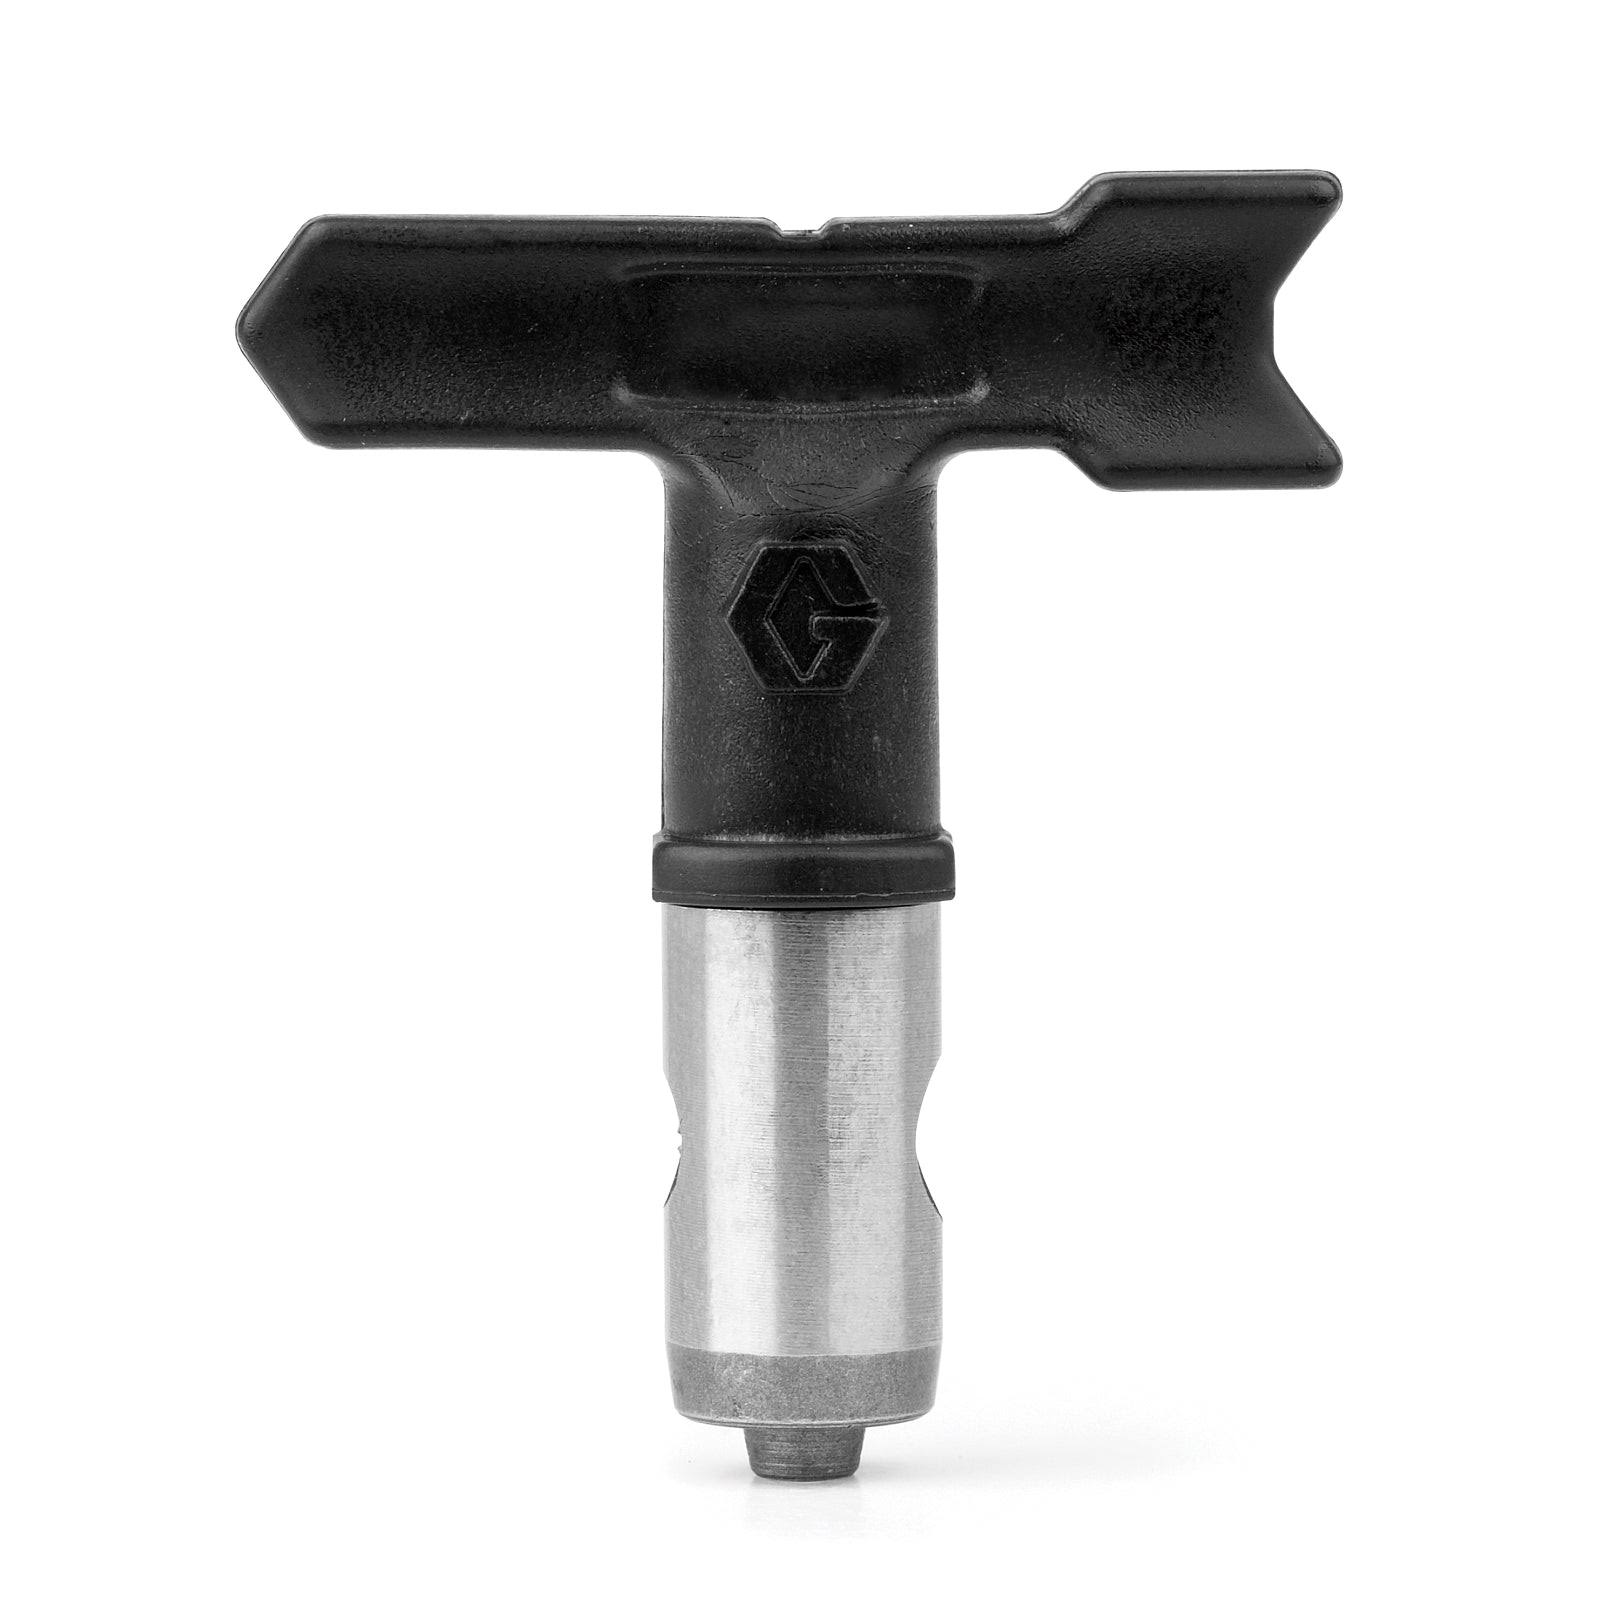 Graco Reversible Switch Tip for Airless Paint Spray Guns